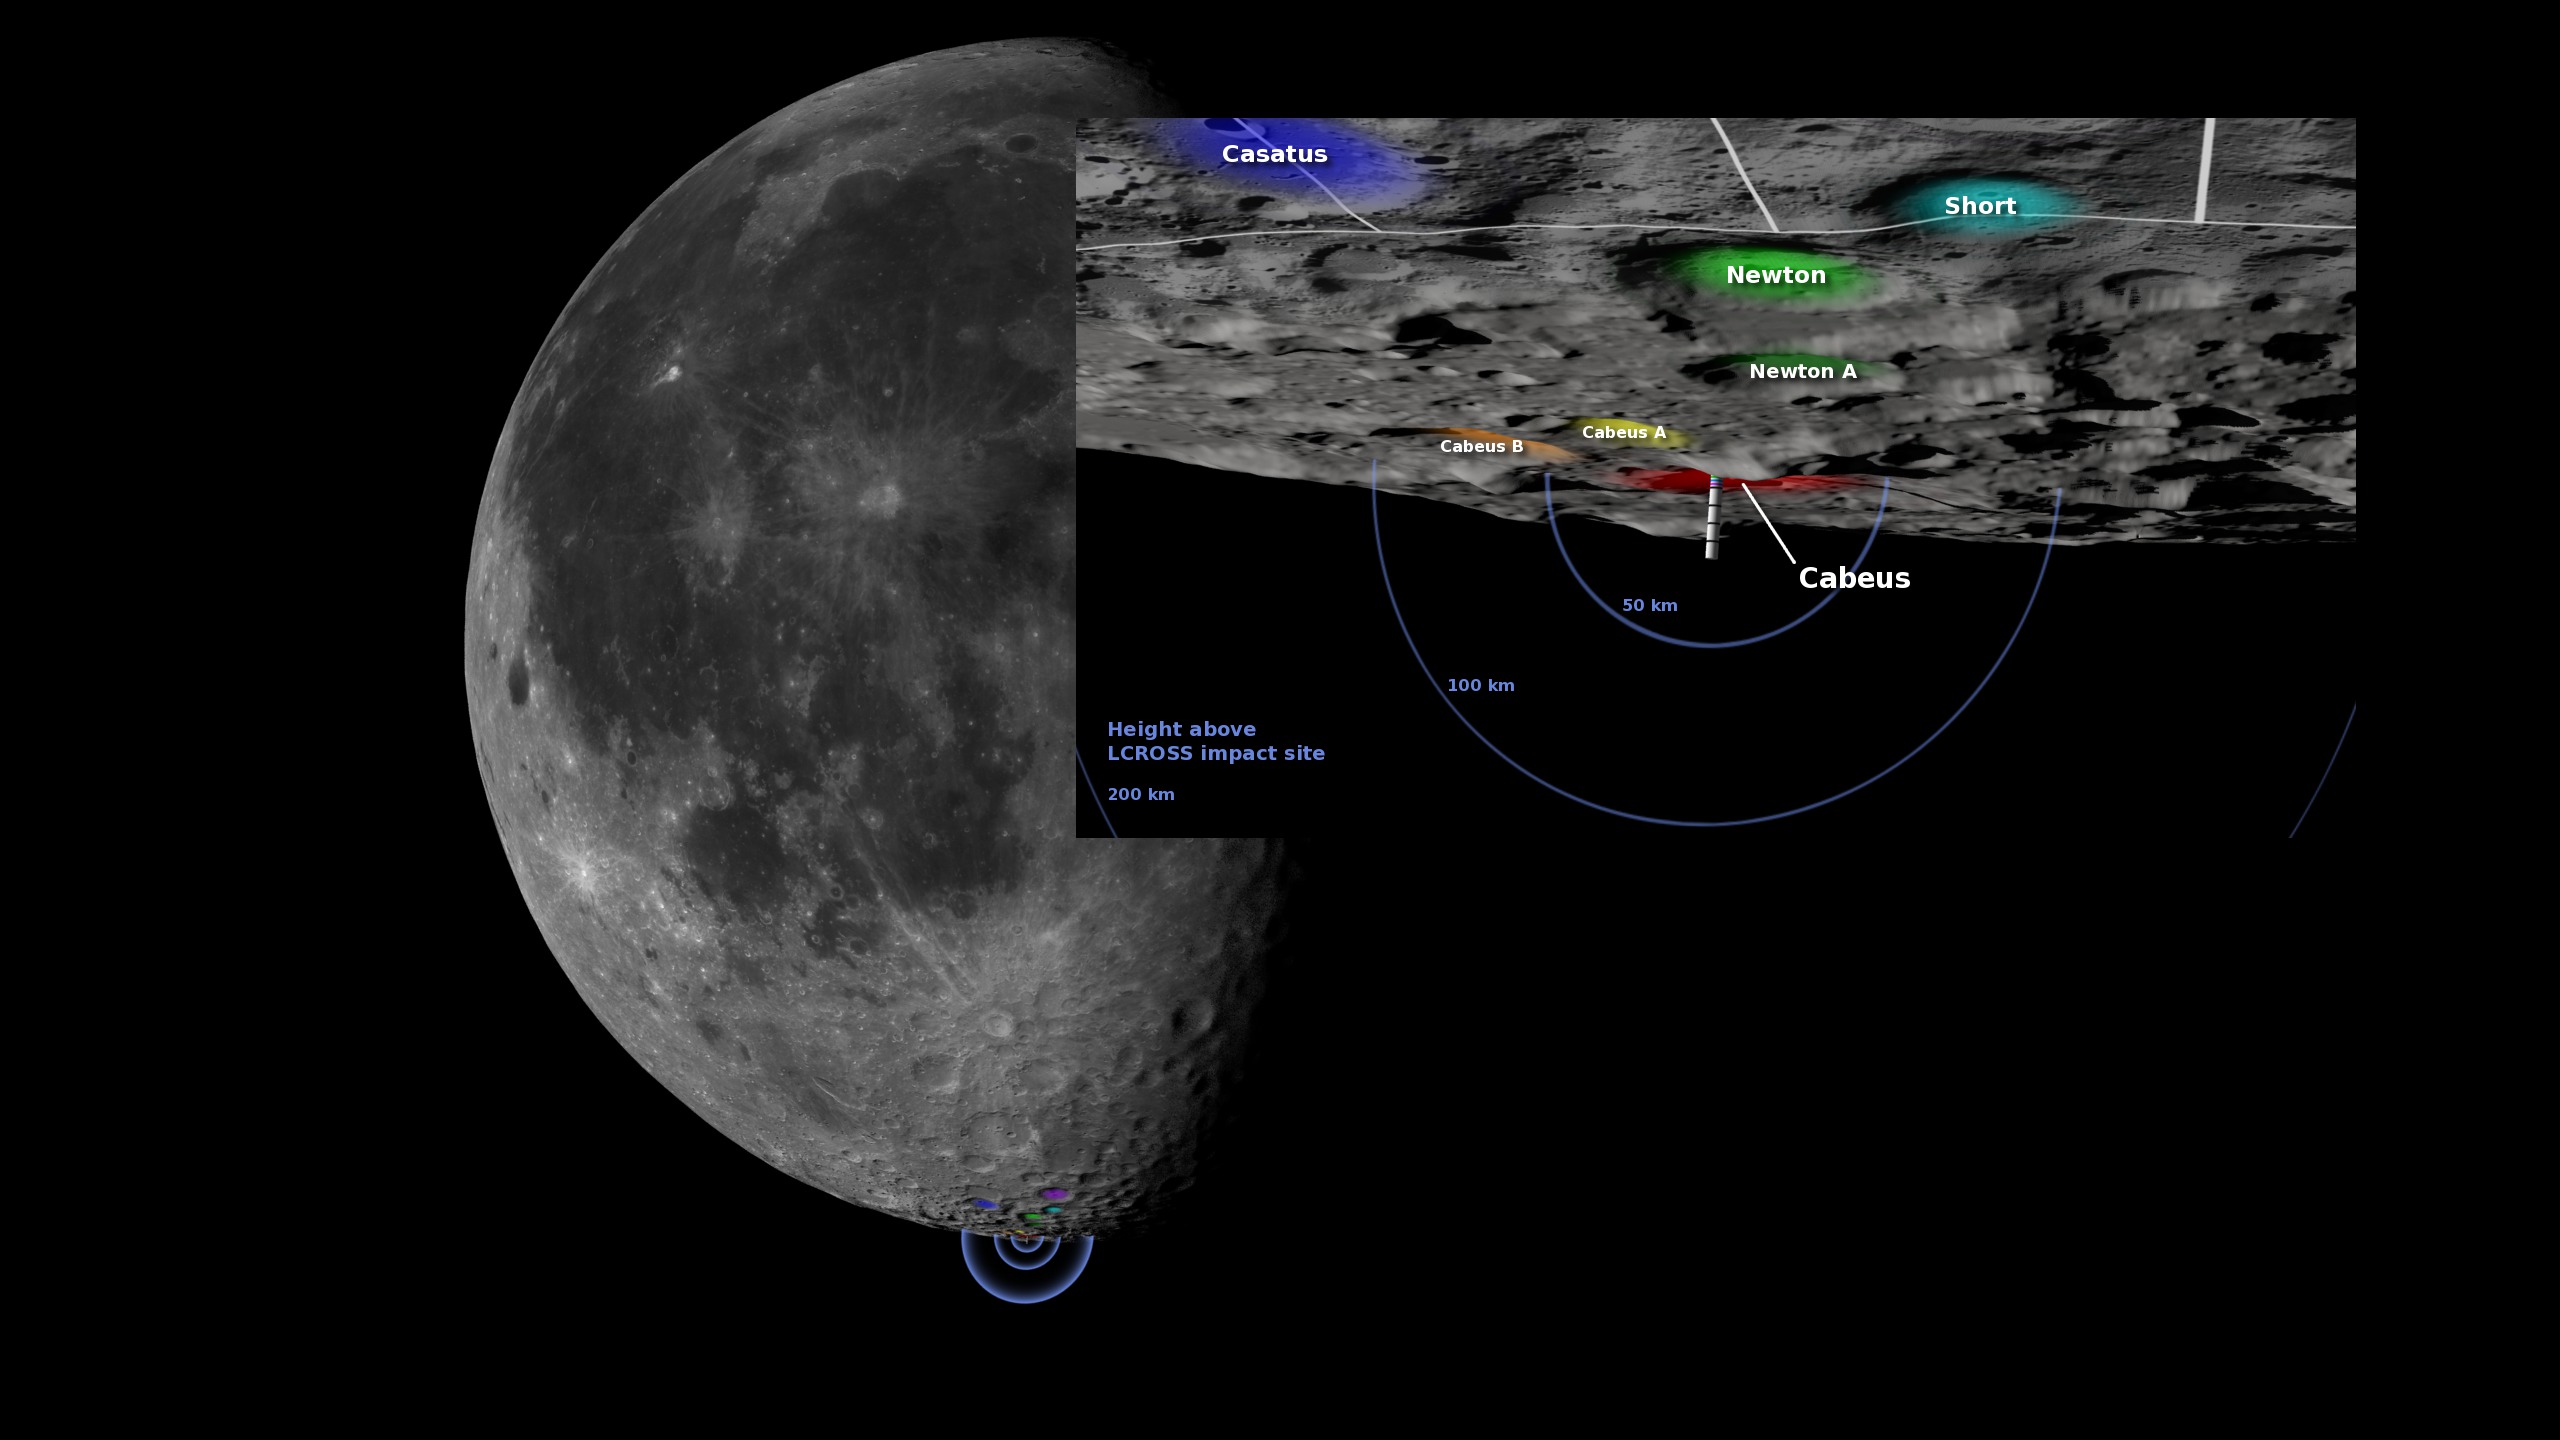 Full disk image of the moon, with an inset containing a close-up of the impact site. A number of craters, including the target crater, are labeled in the inset.